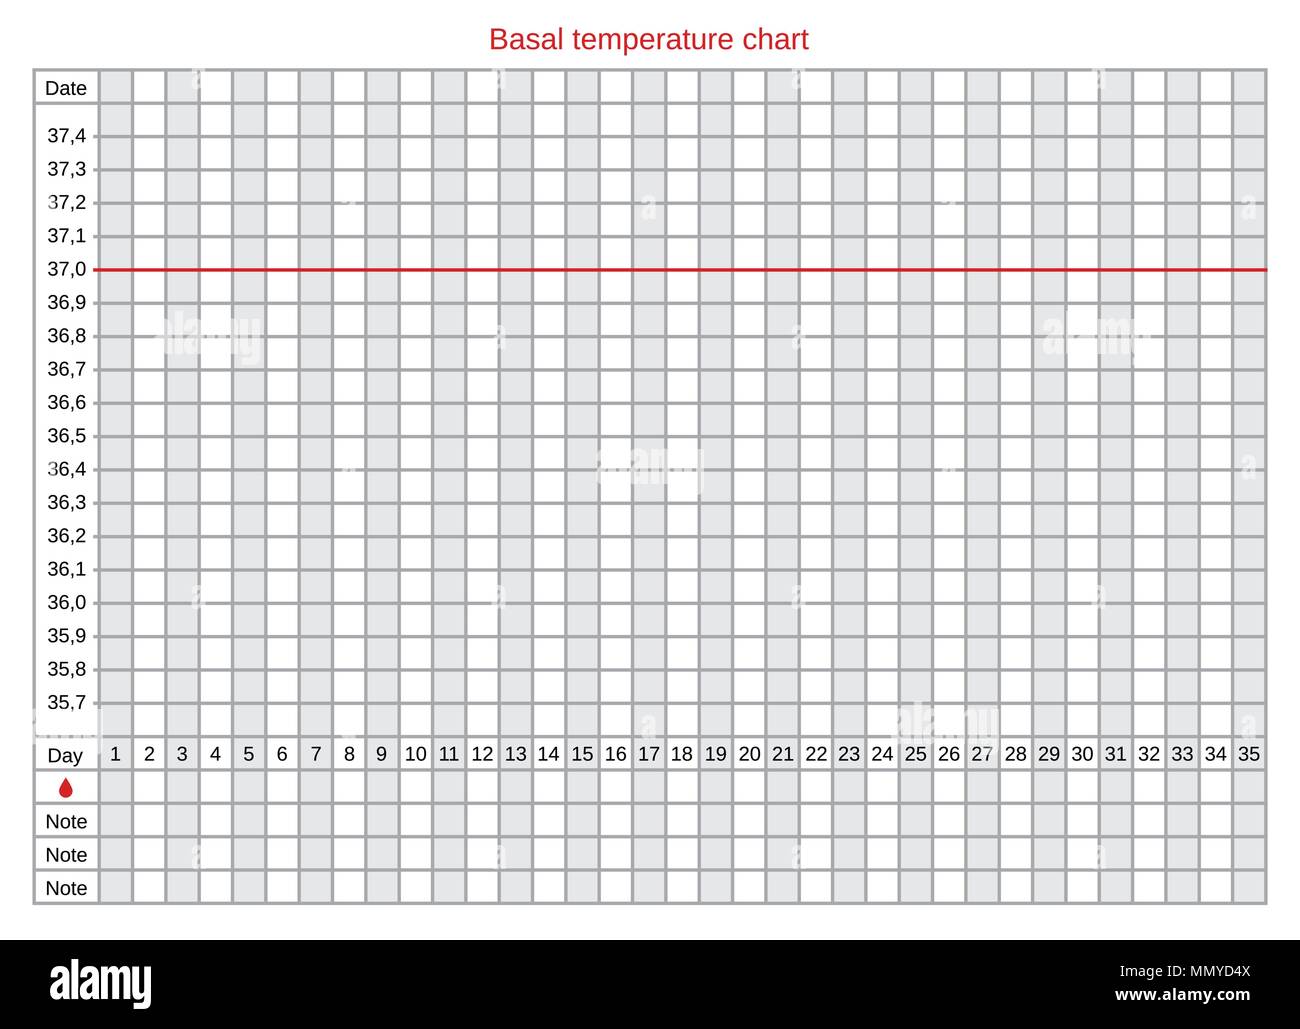 Basal Body Temperature Ovulation Chart Celsius